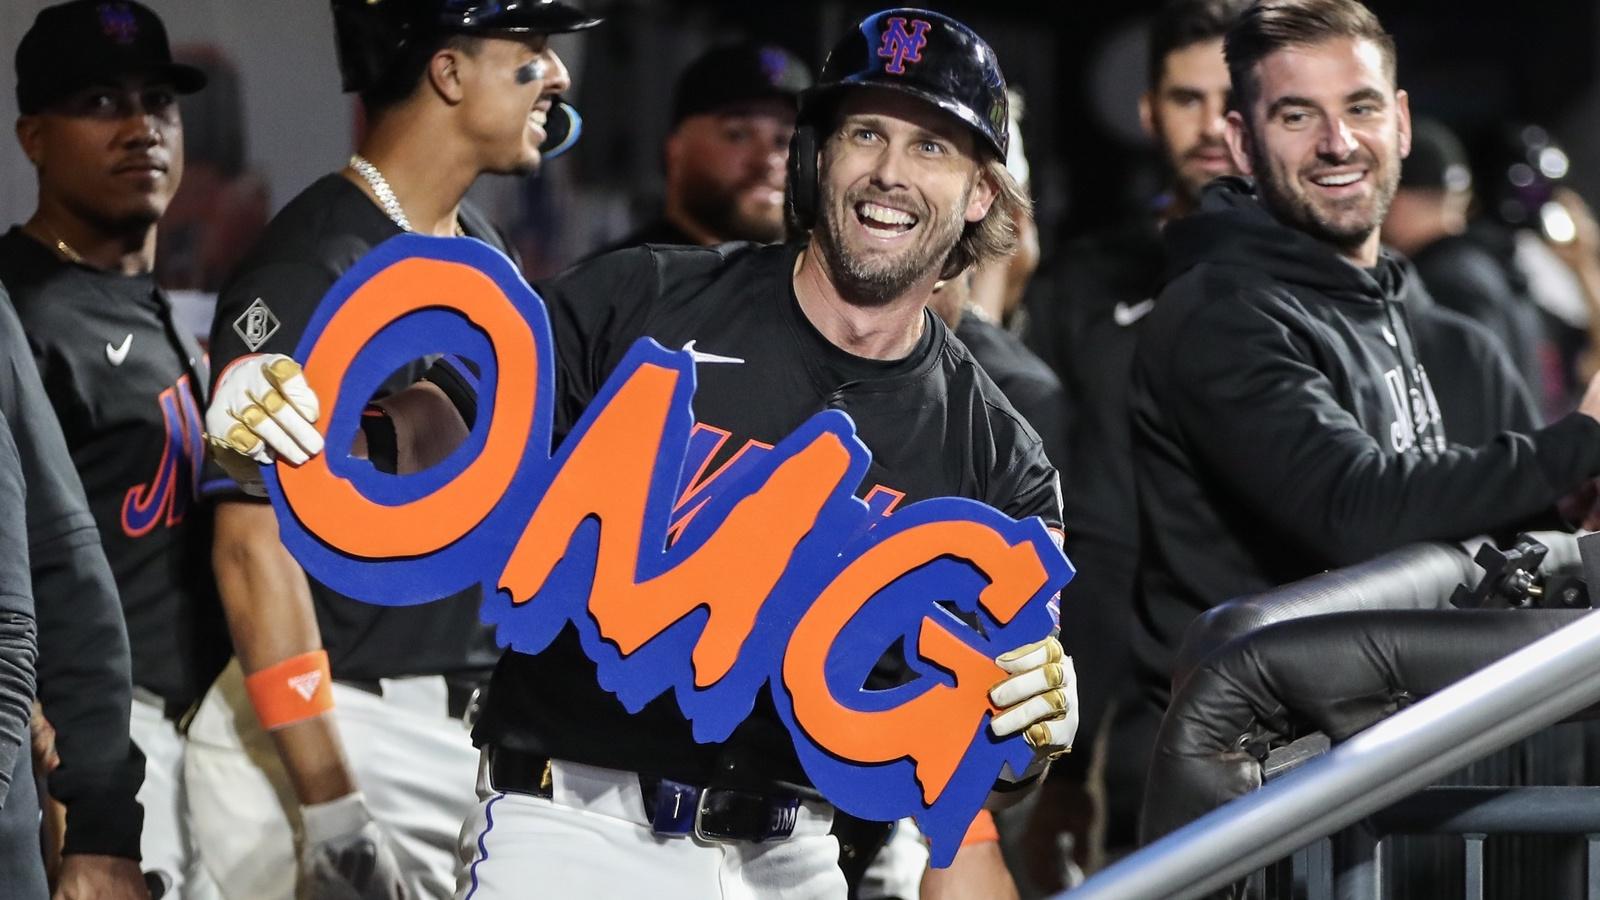 Mets' offense continues to roll in 7-2 win over streaking Astros